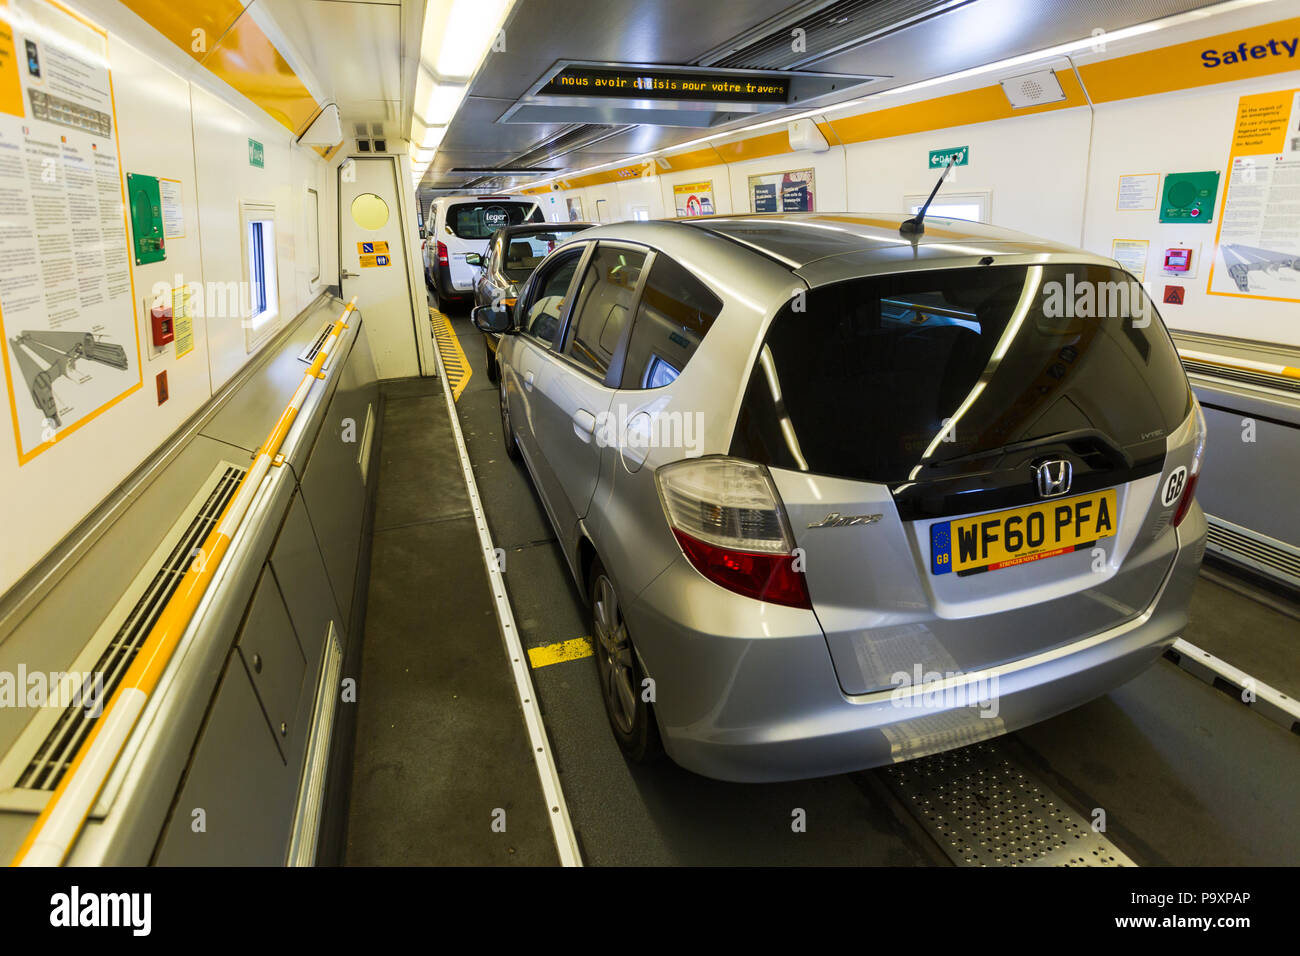 Vehicles parked on the Channel Tunnel, or Chunnel, Shuttle, train carrying them from England to France Stock Photo